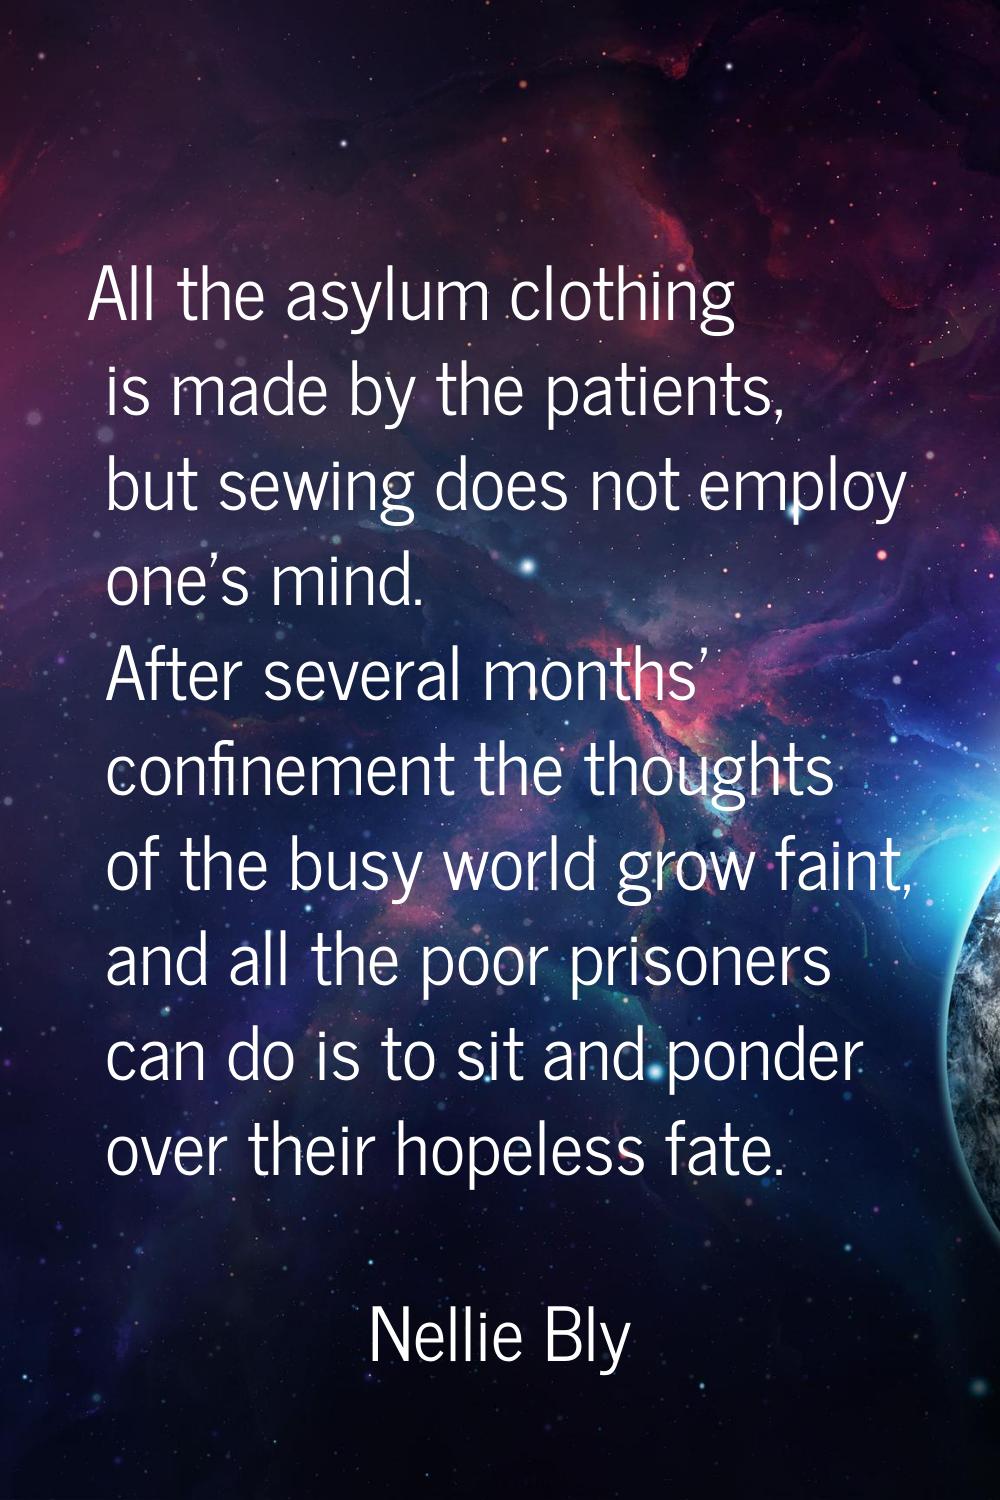 All the asylum clothing is made by the patients, but sewing does not employ one's mind. After sever